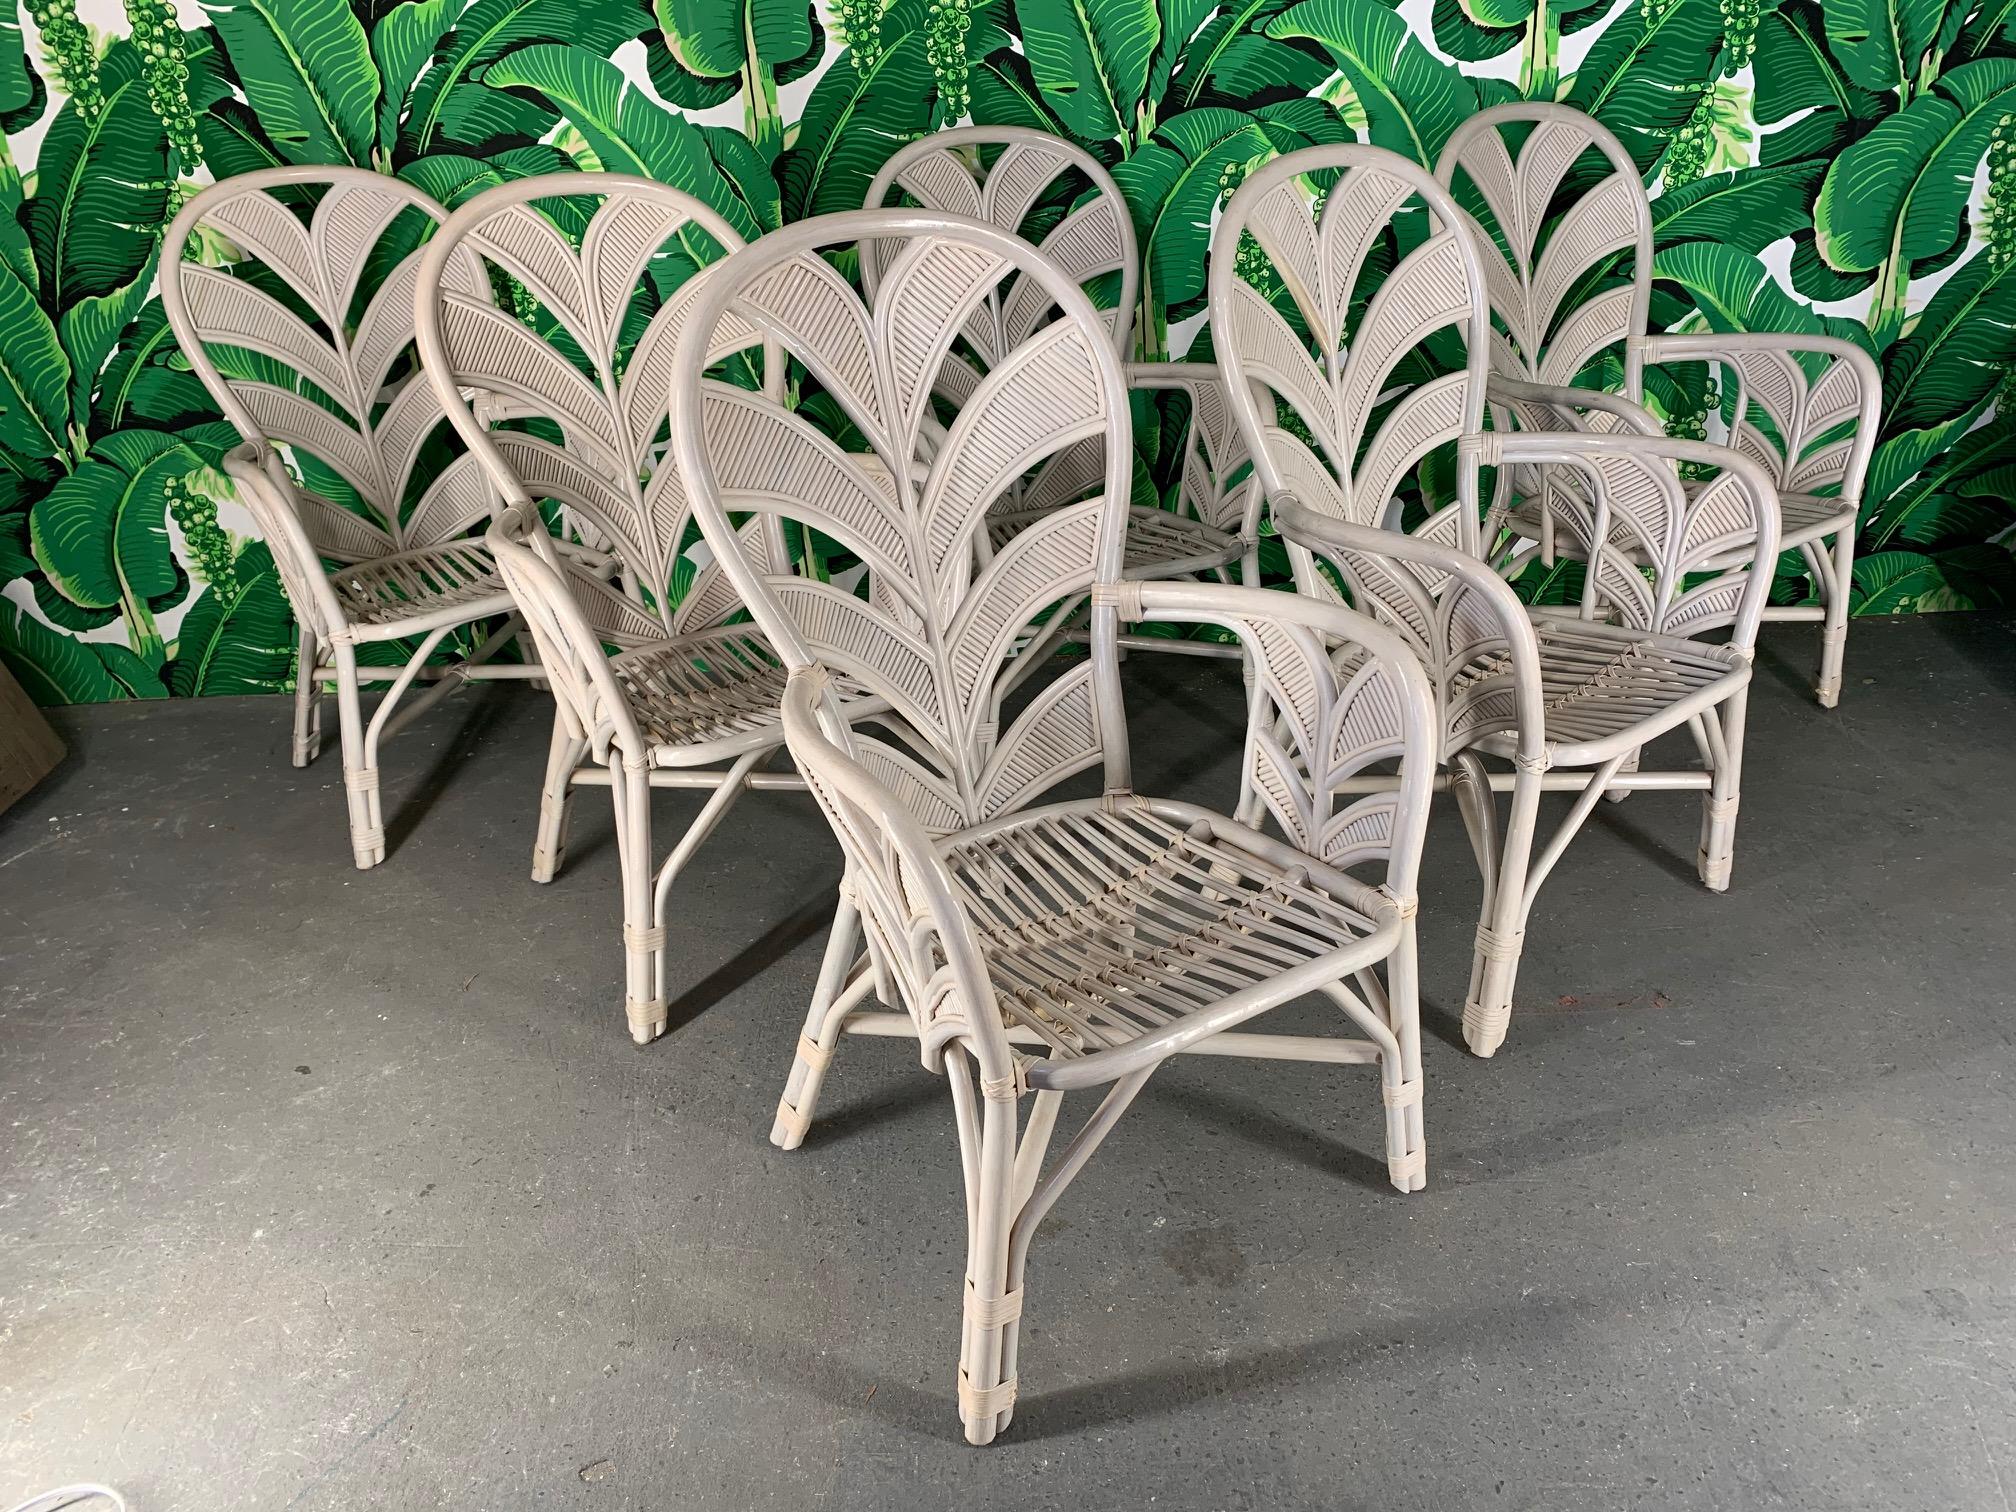 Midcentury rattan arm chairs feature sculptural palm frond motif for a touch of vintage Palm Beach style in any decor. No makers mark other than Made in Philippines tag. Good vintage condition with minor abrasions consistent with age.